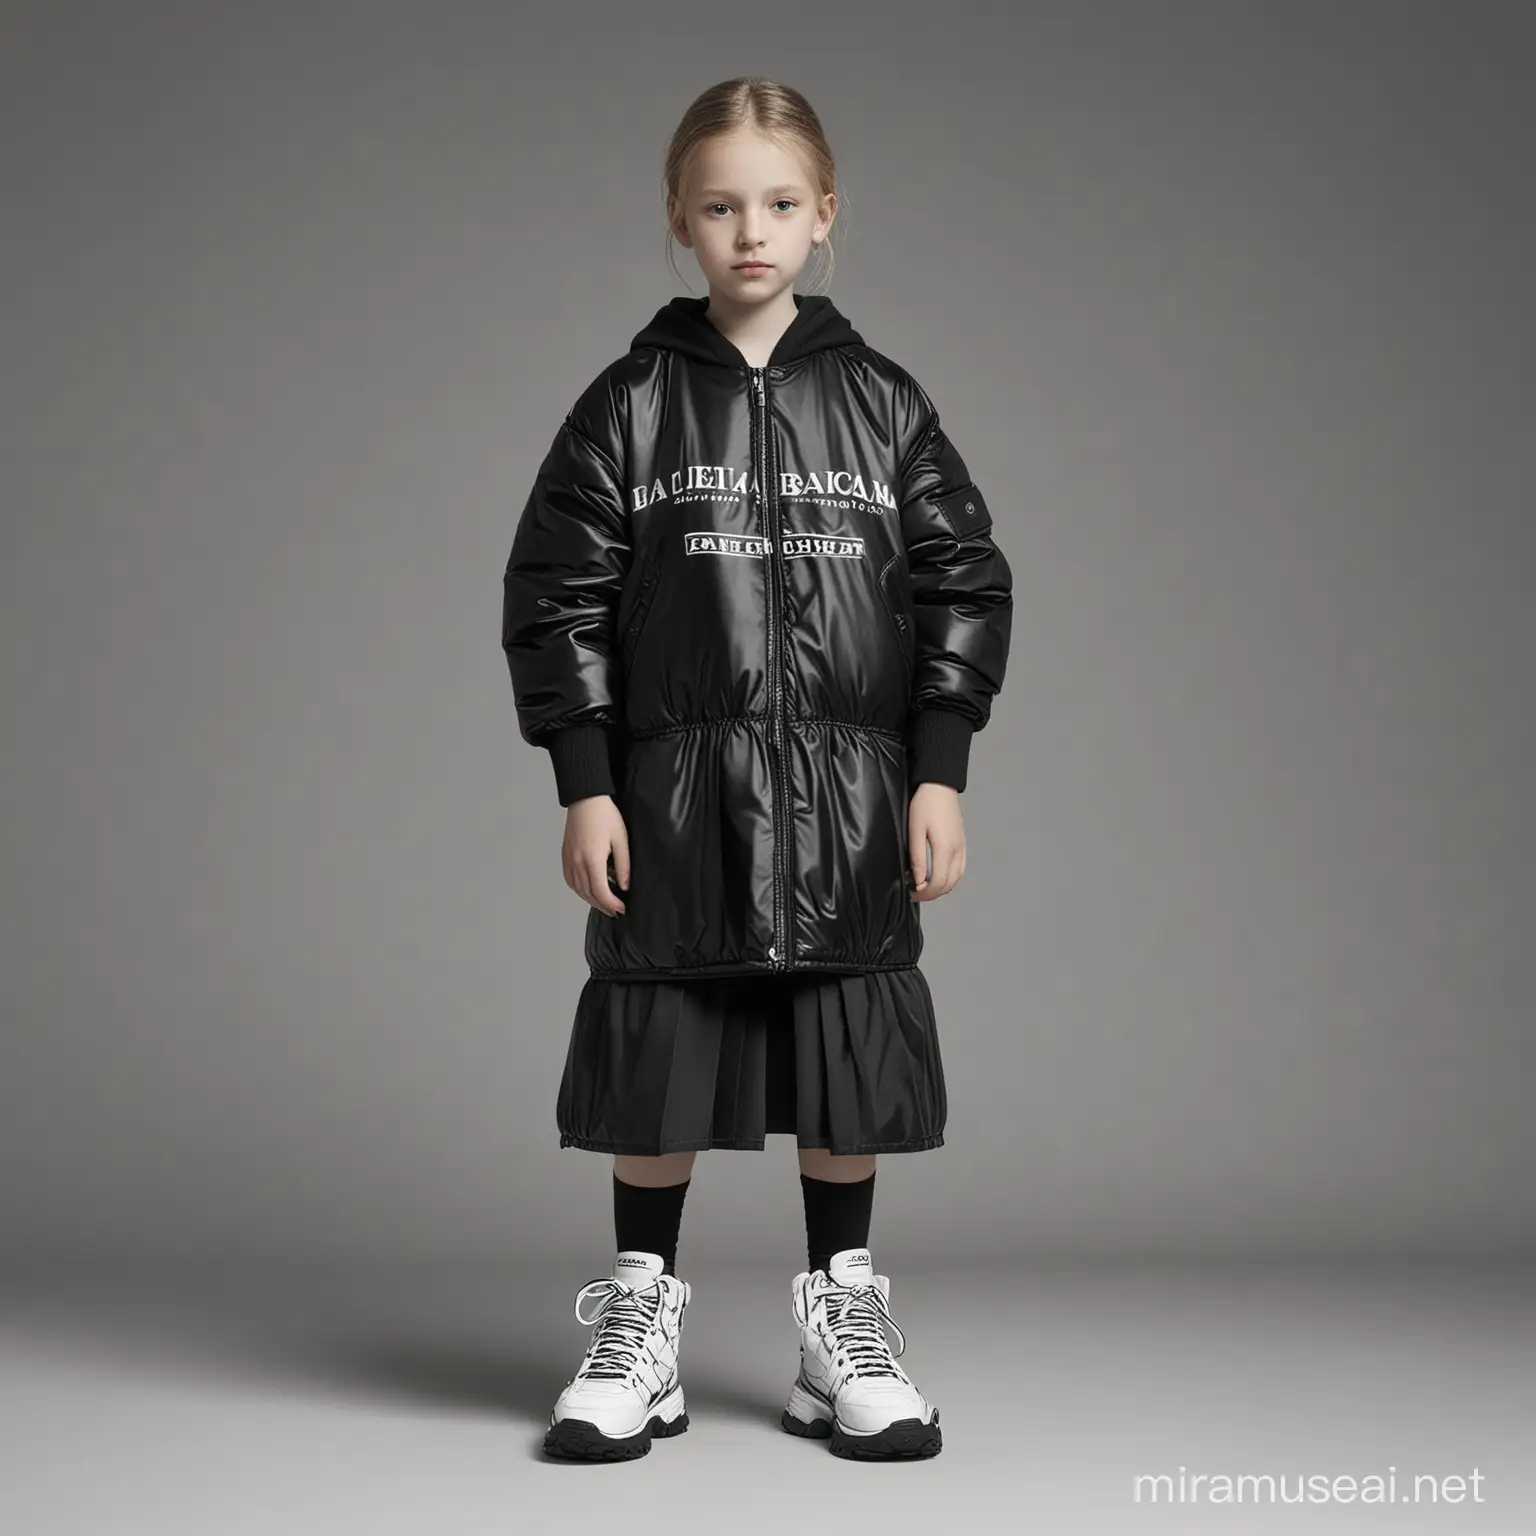 Create an image depicting a collaboration between Balenciaga and UNICEF. The image should reflect the shared values of responsible fashion and child protection. Include the logos of both Balenciaga and UNICEF, as well as symbolic elements representing the commitment of both parties to this collaboration